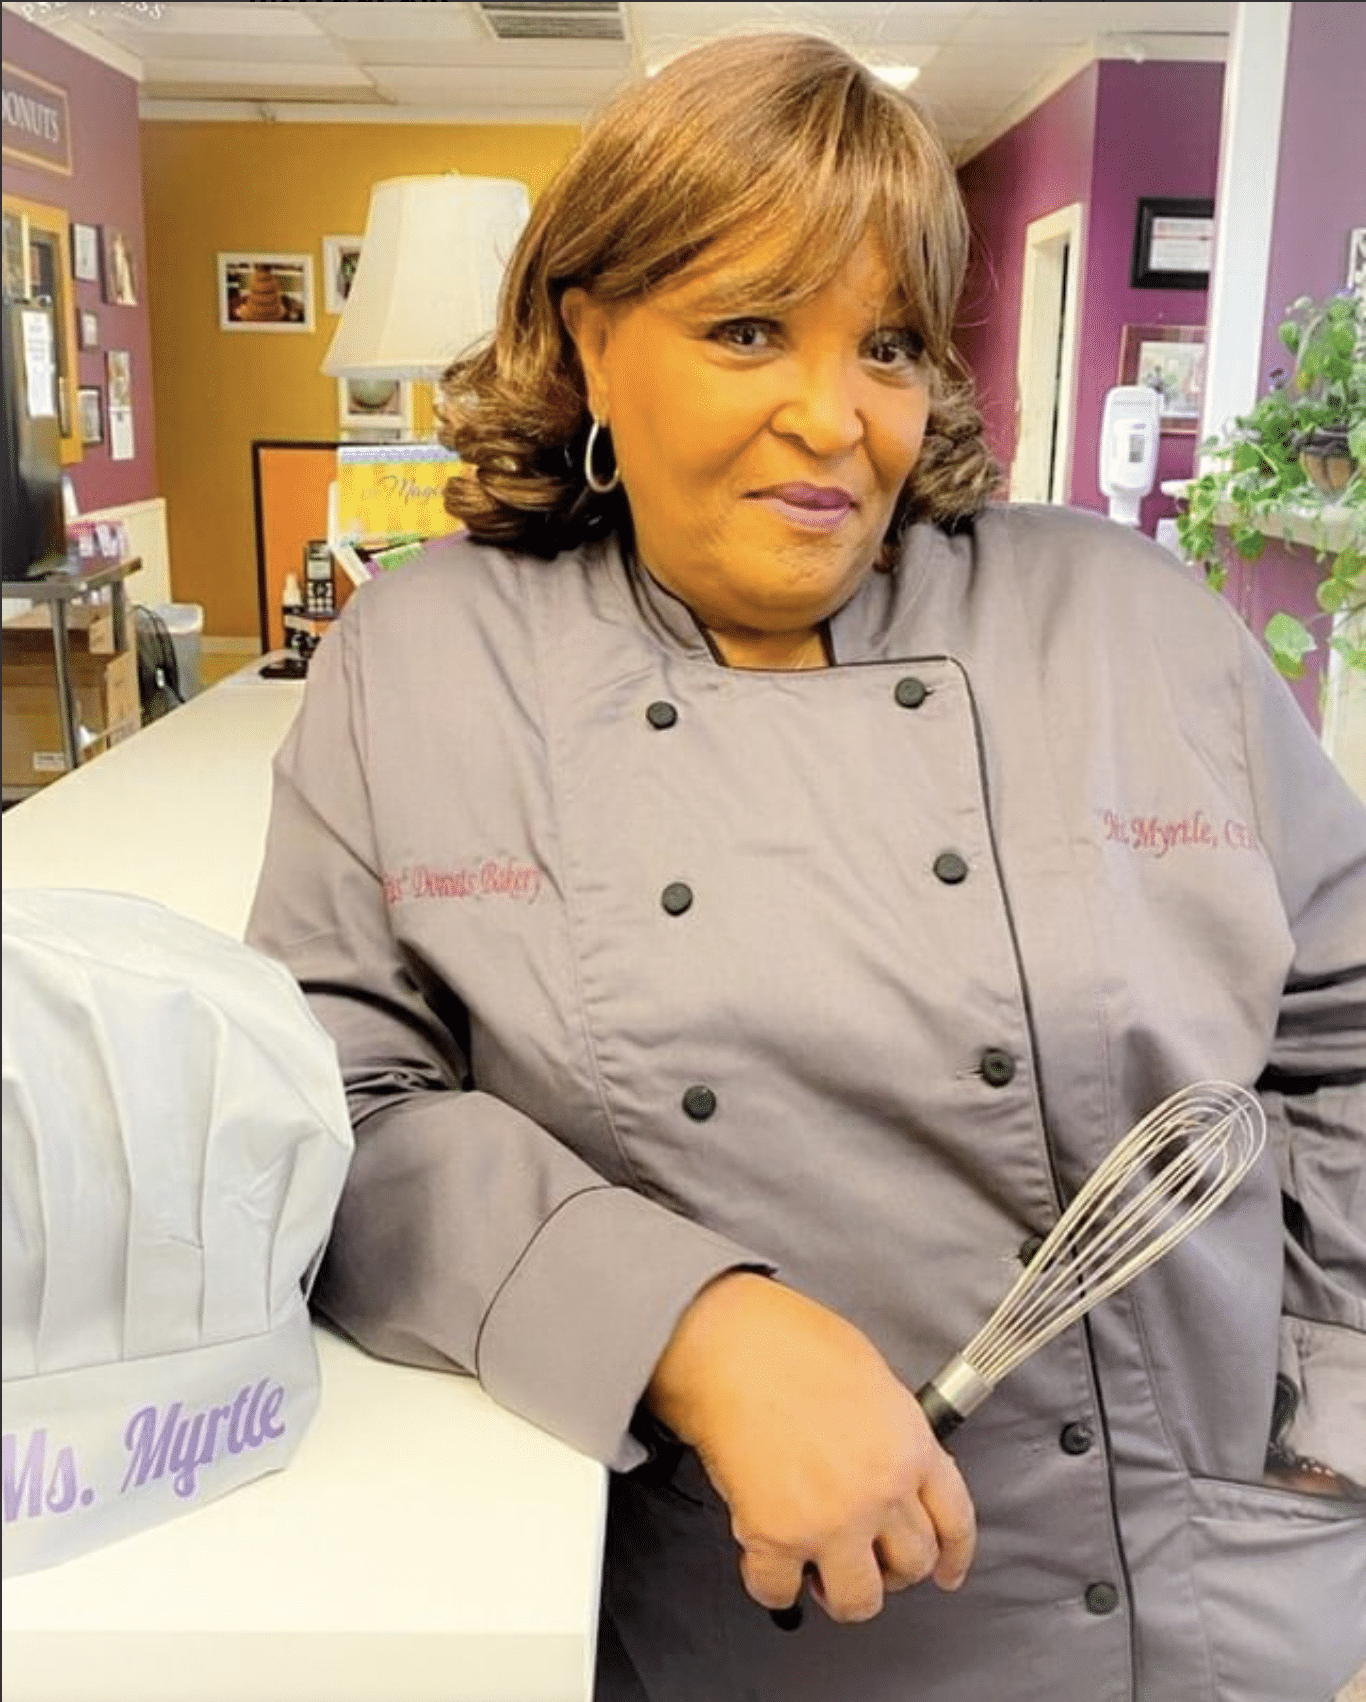 Ms. Myrtle of Ms. Myrtle's Bakery Shoppe, formerly Not Jus Donuts, leaning on a counter while wearing a chef's coat and holding a whisk. A baker's hat with her name embroidered on it sits beside her. She makes some of the best tea cakes in Houston. 